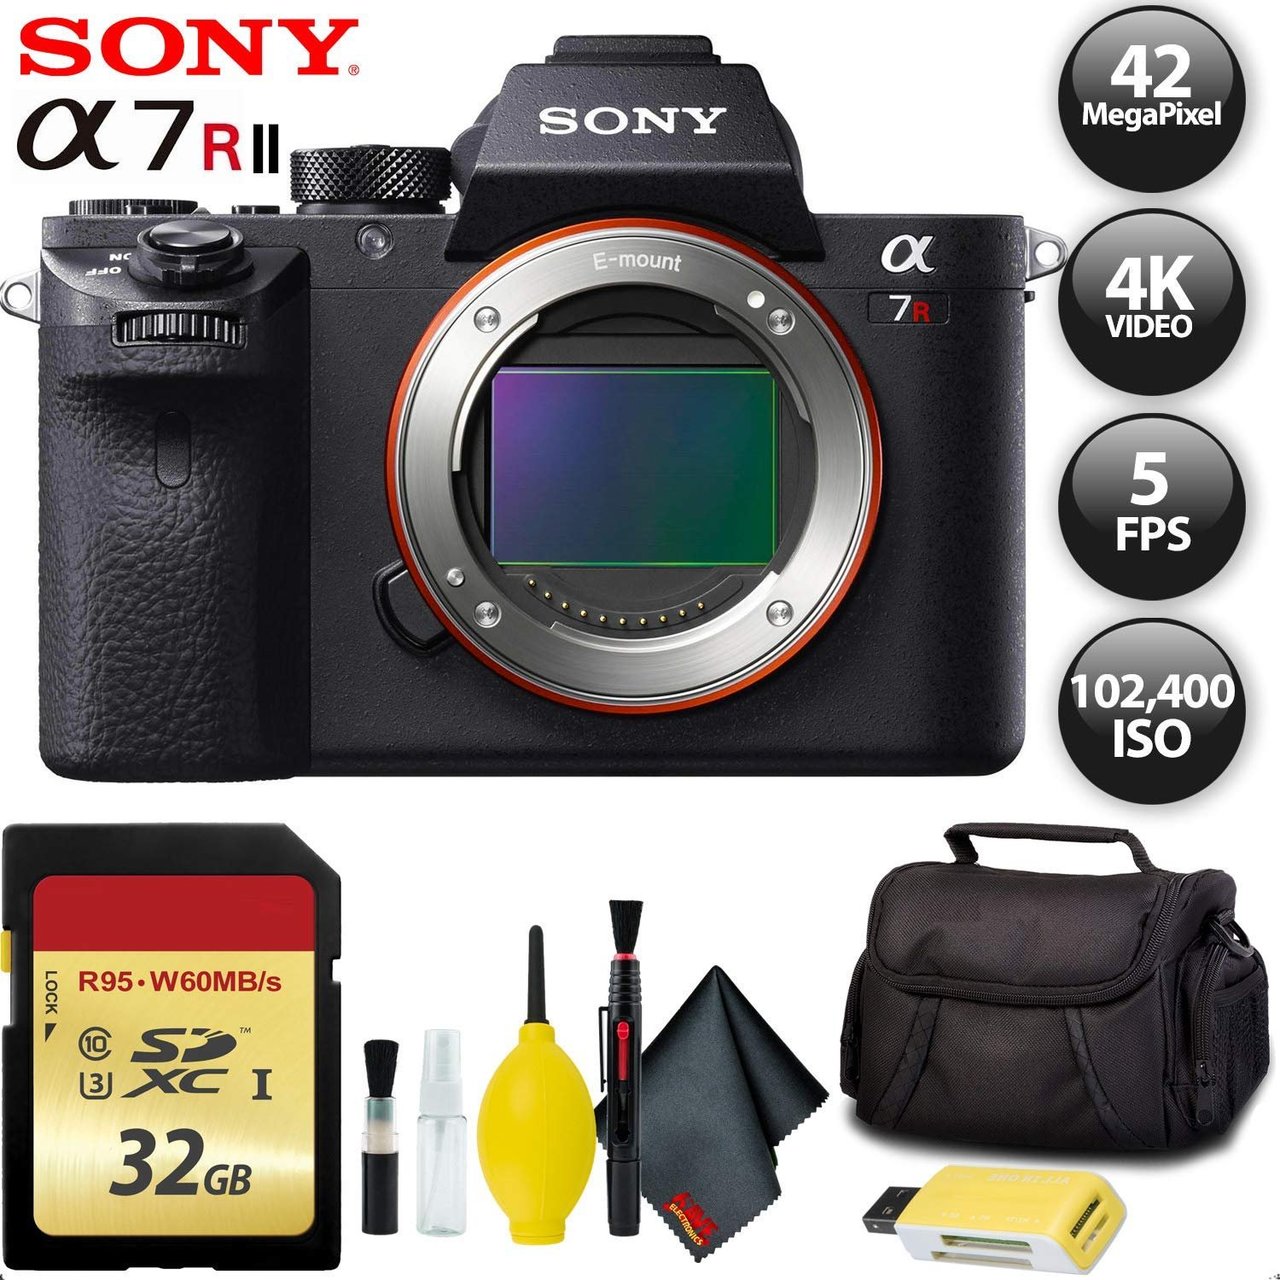 Sony Alpha a7R II Mirrorless Digital Camera + 256GB Memory Card Base Kit with Accessories